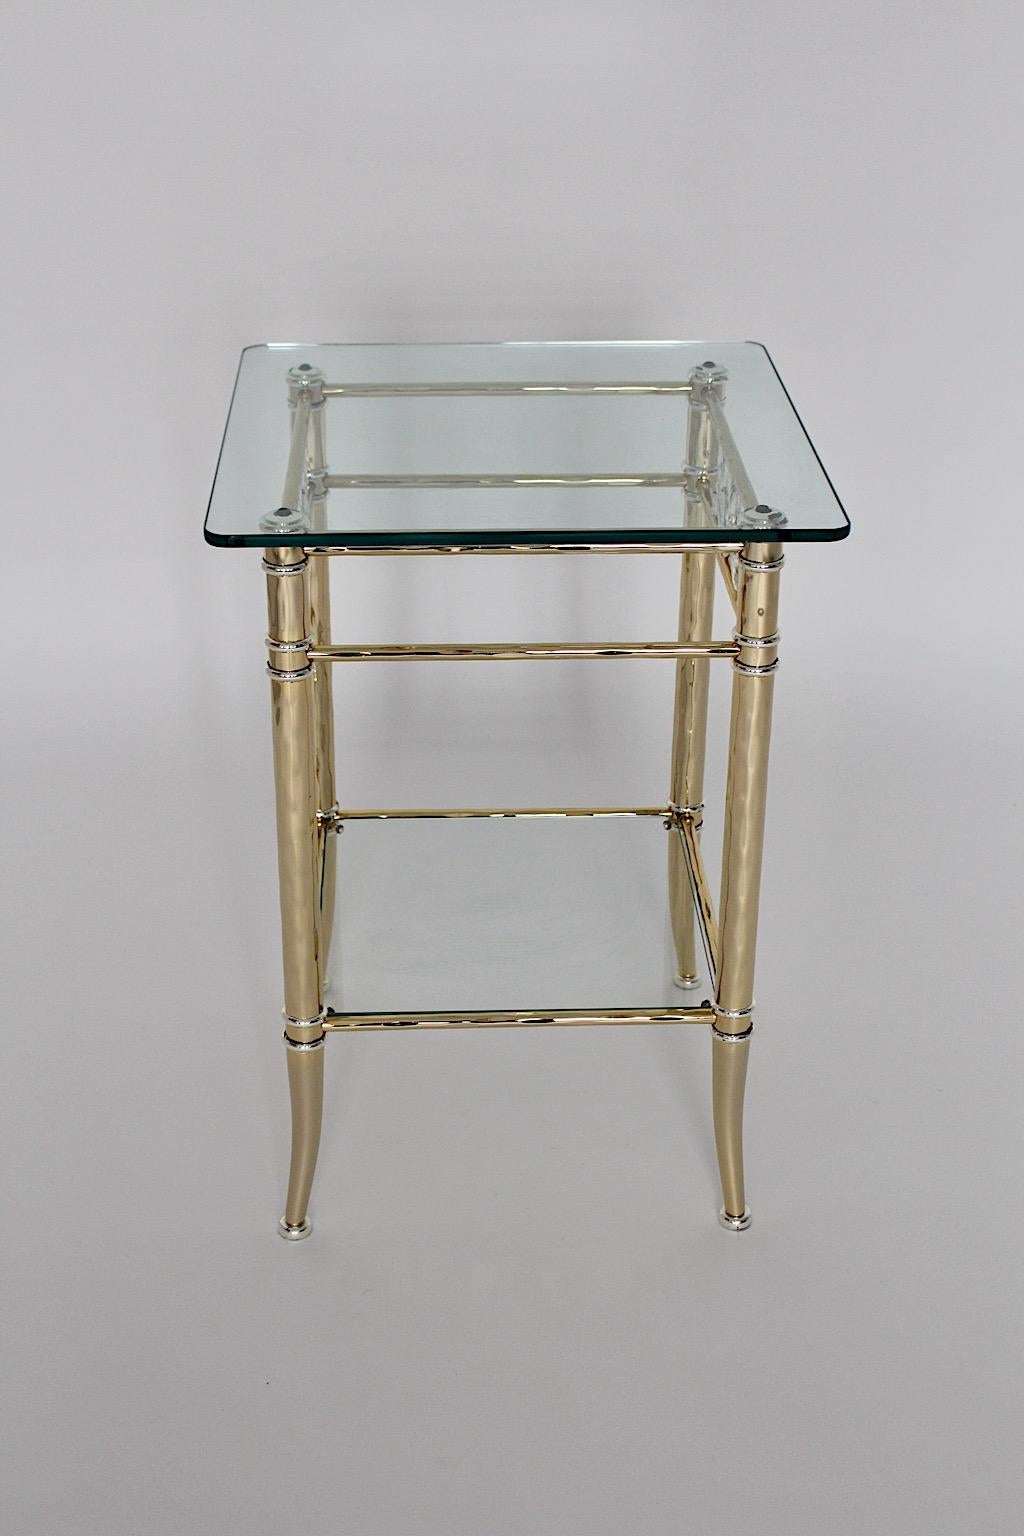 Hollywood Regency Style side table from gilt and silvered metal with clear glass plates flower decor Style Maison Bagues 1970s France.
A fantastic freestanding side table with two tiers from clear glass and slightly curved legs from gilt and